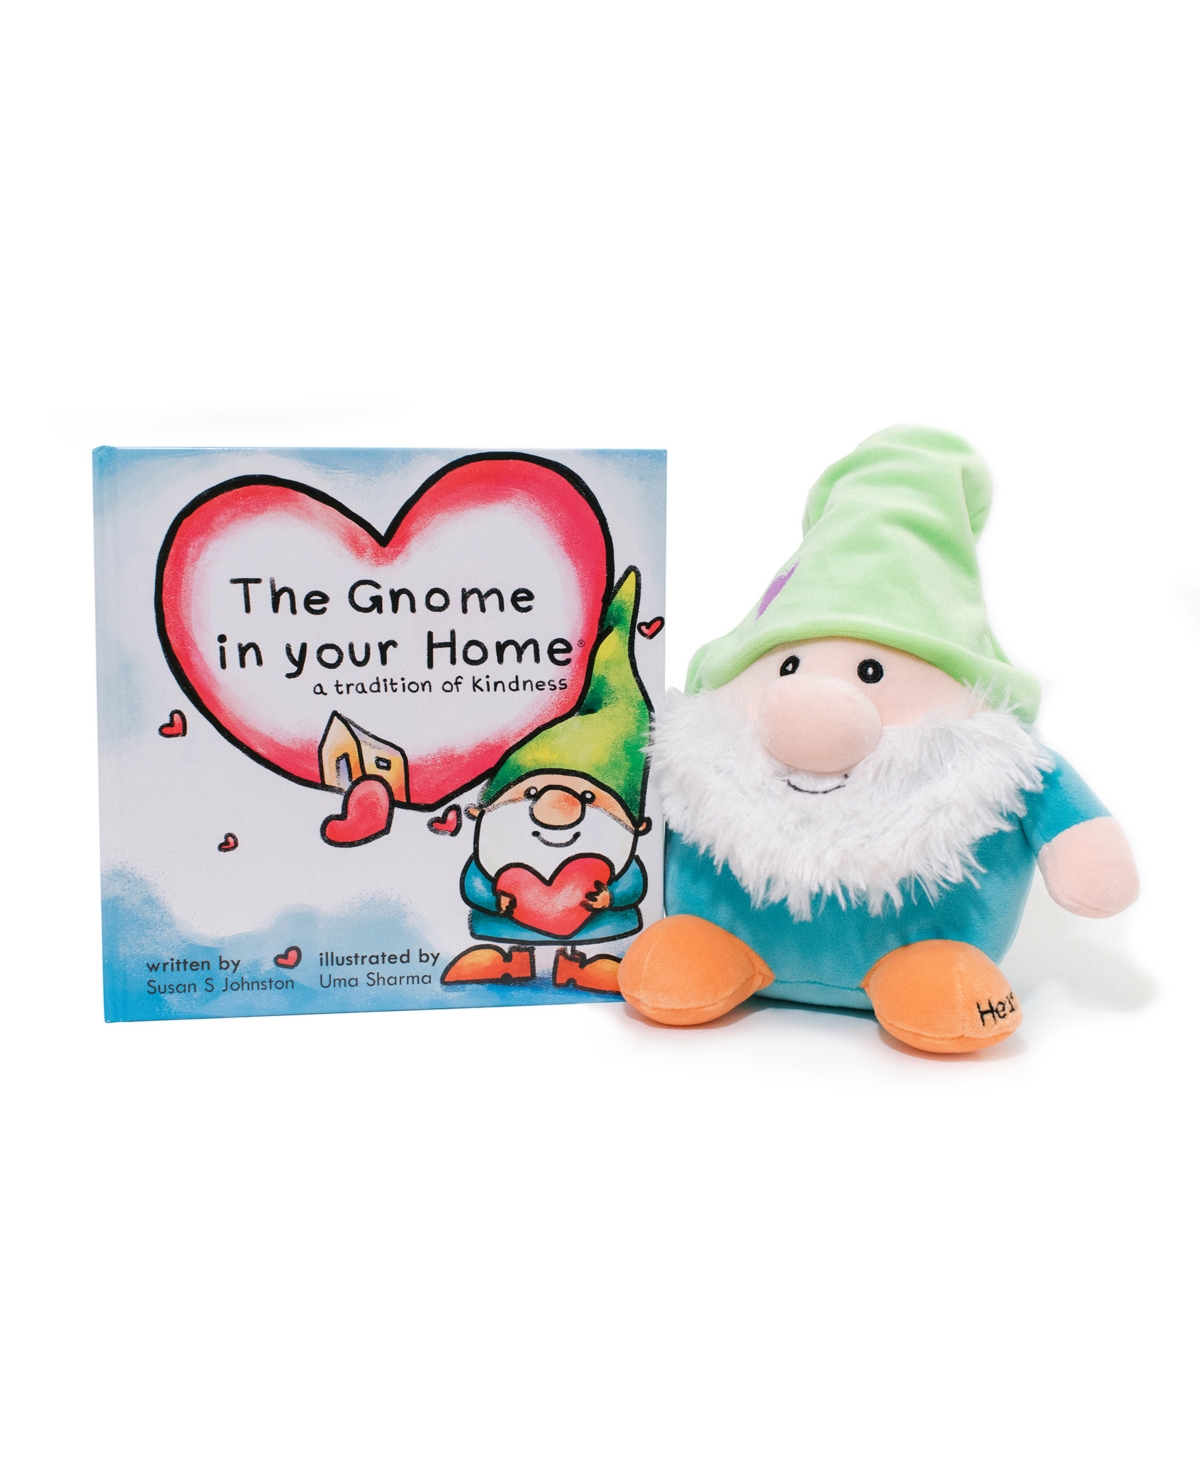 Gnome In Your Home Baby Plush Toy With Hardcover Children's Book, 2 Piece Set In Green